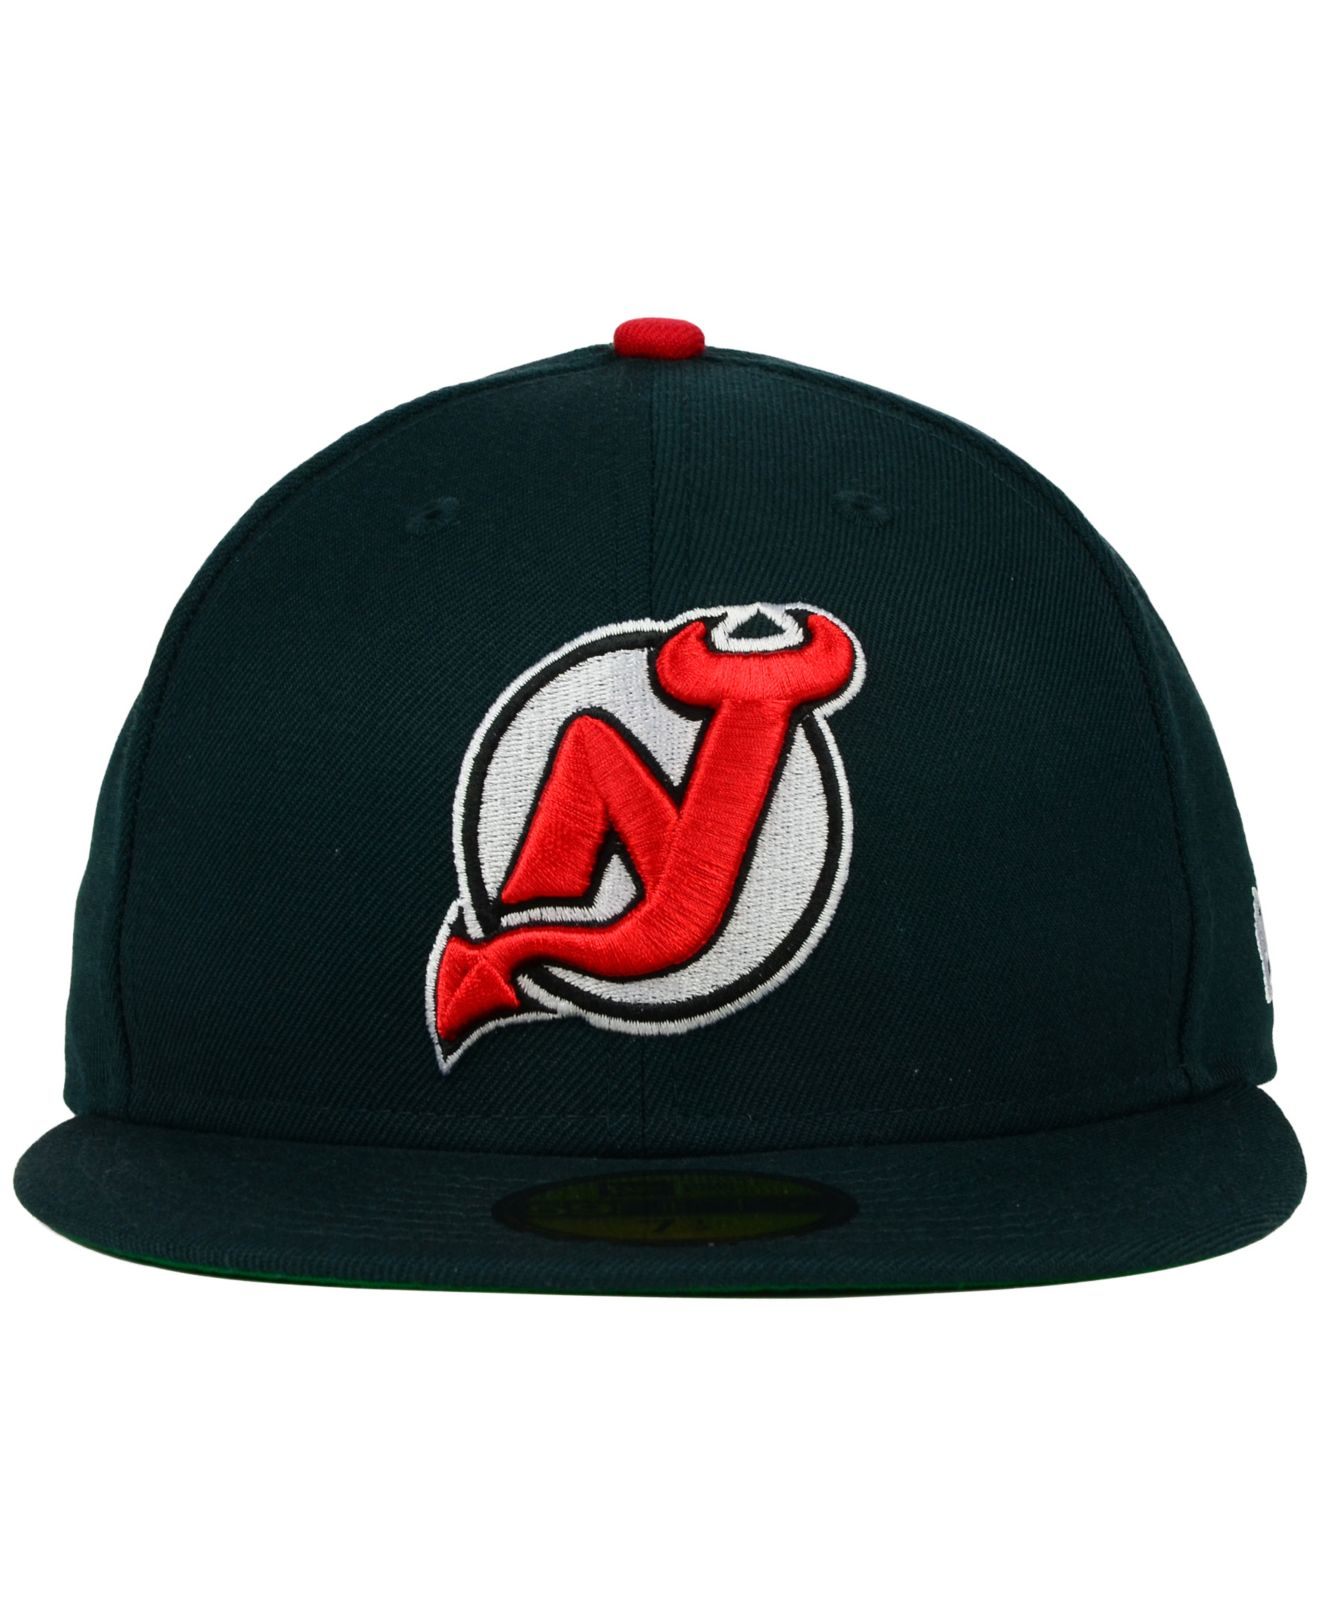 New Jersey Devils Jersey green – Classic Authentics